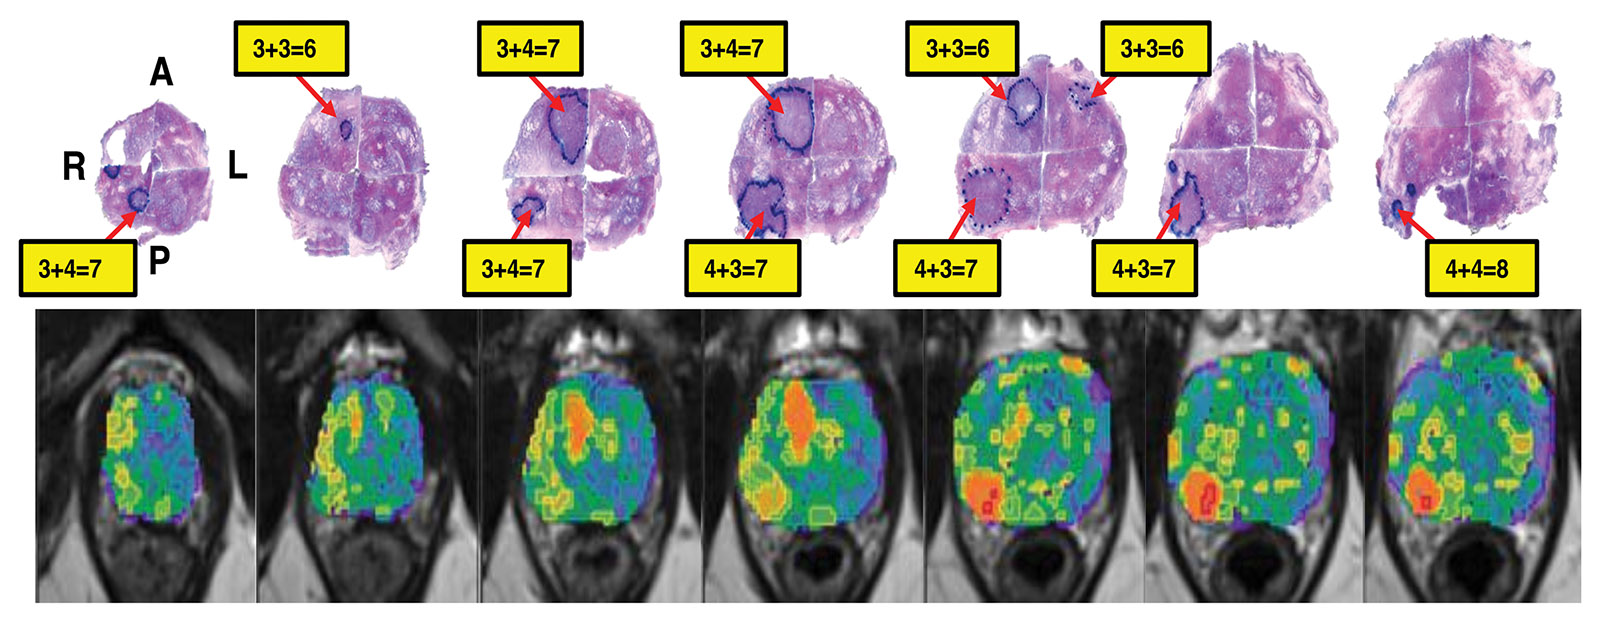 Correlation of habitat risk score in MRI images (bottom row) with the radical prostatectomy surgical specimens histological images (top row) in a man with prostate cancer.